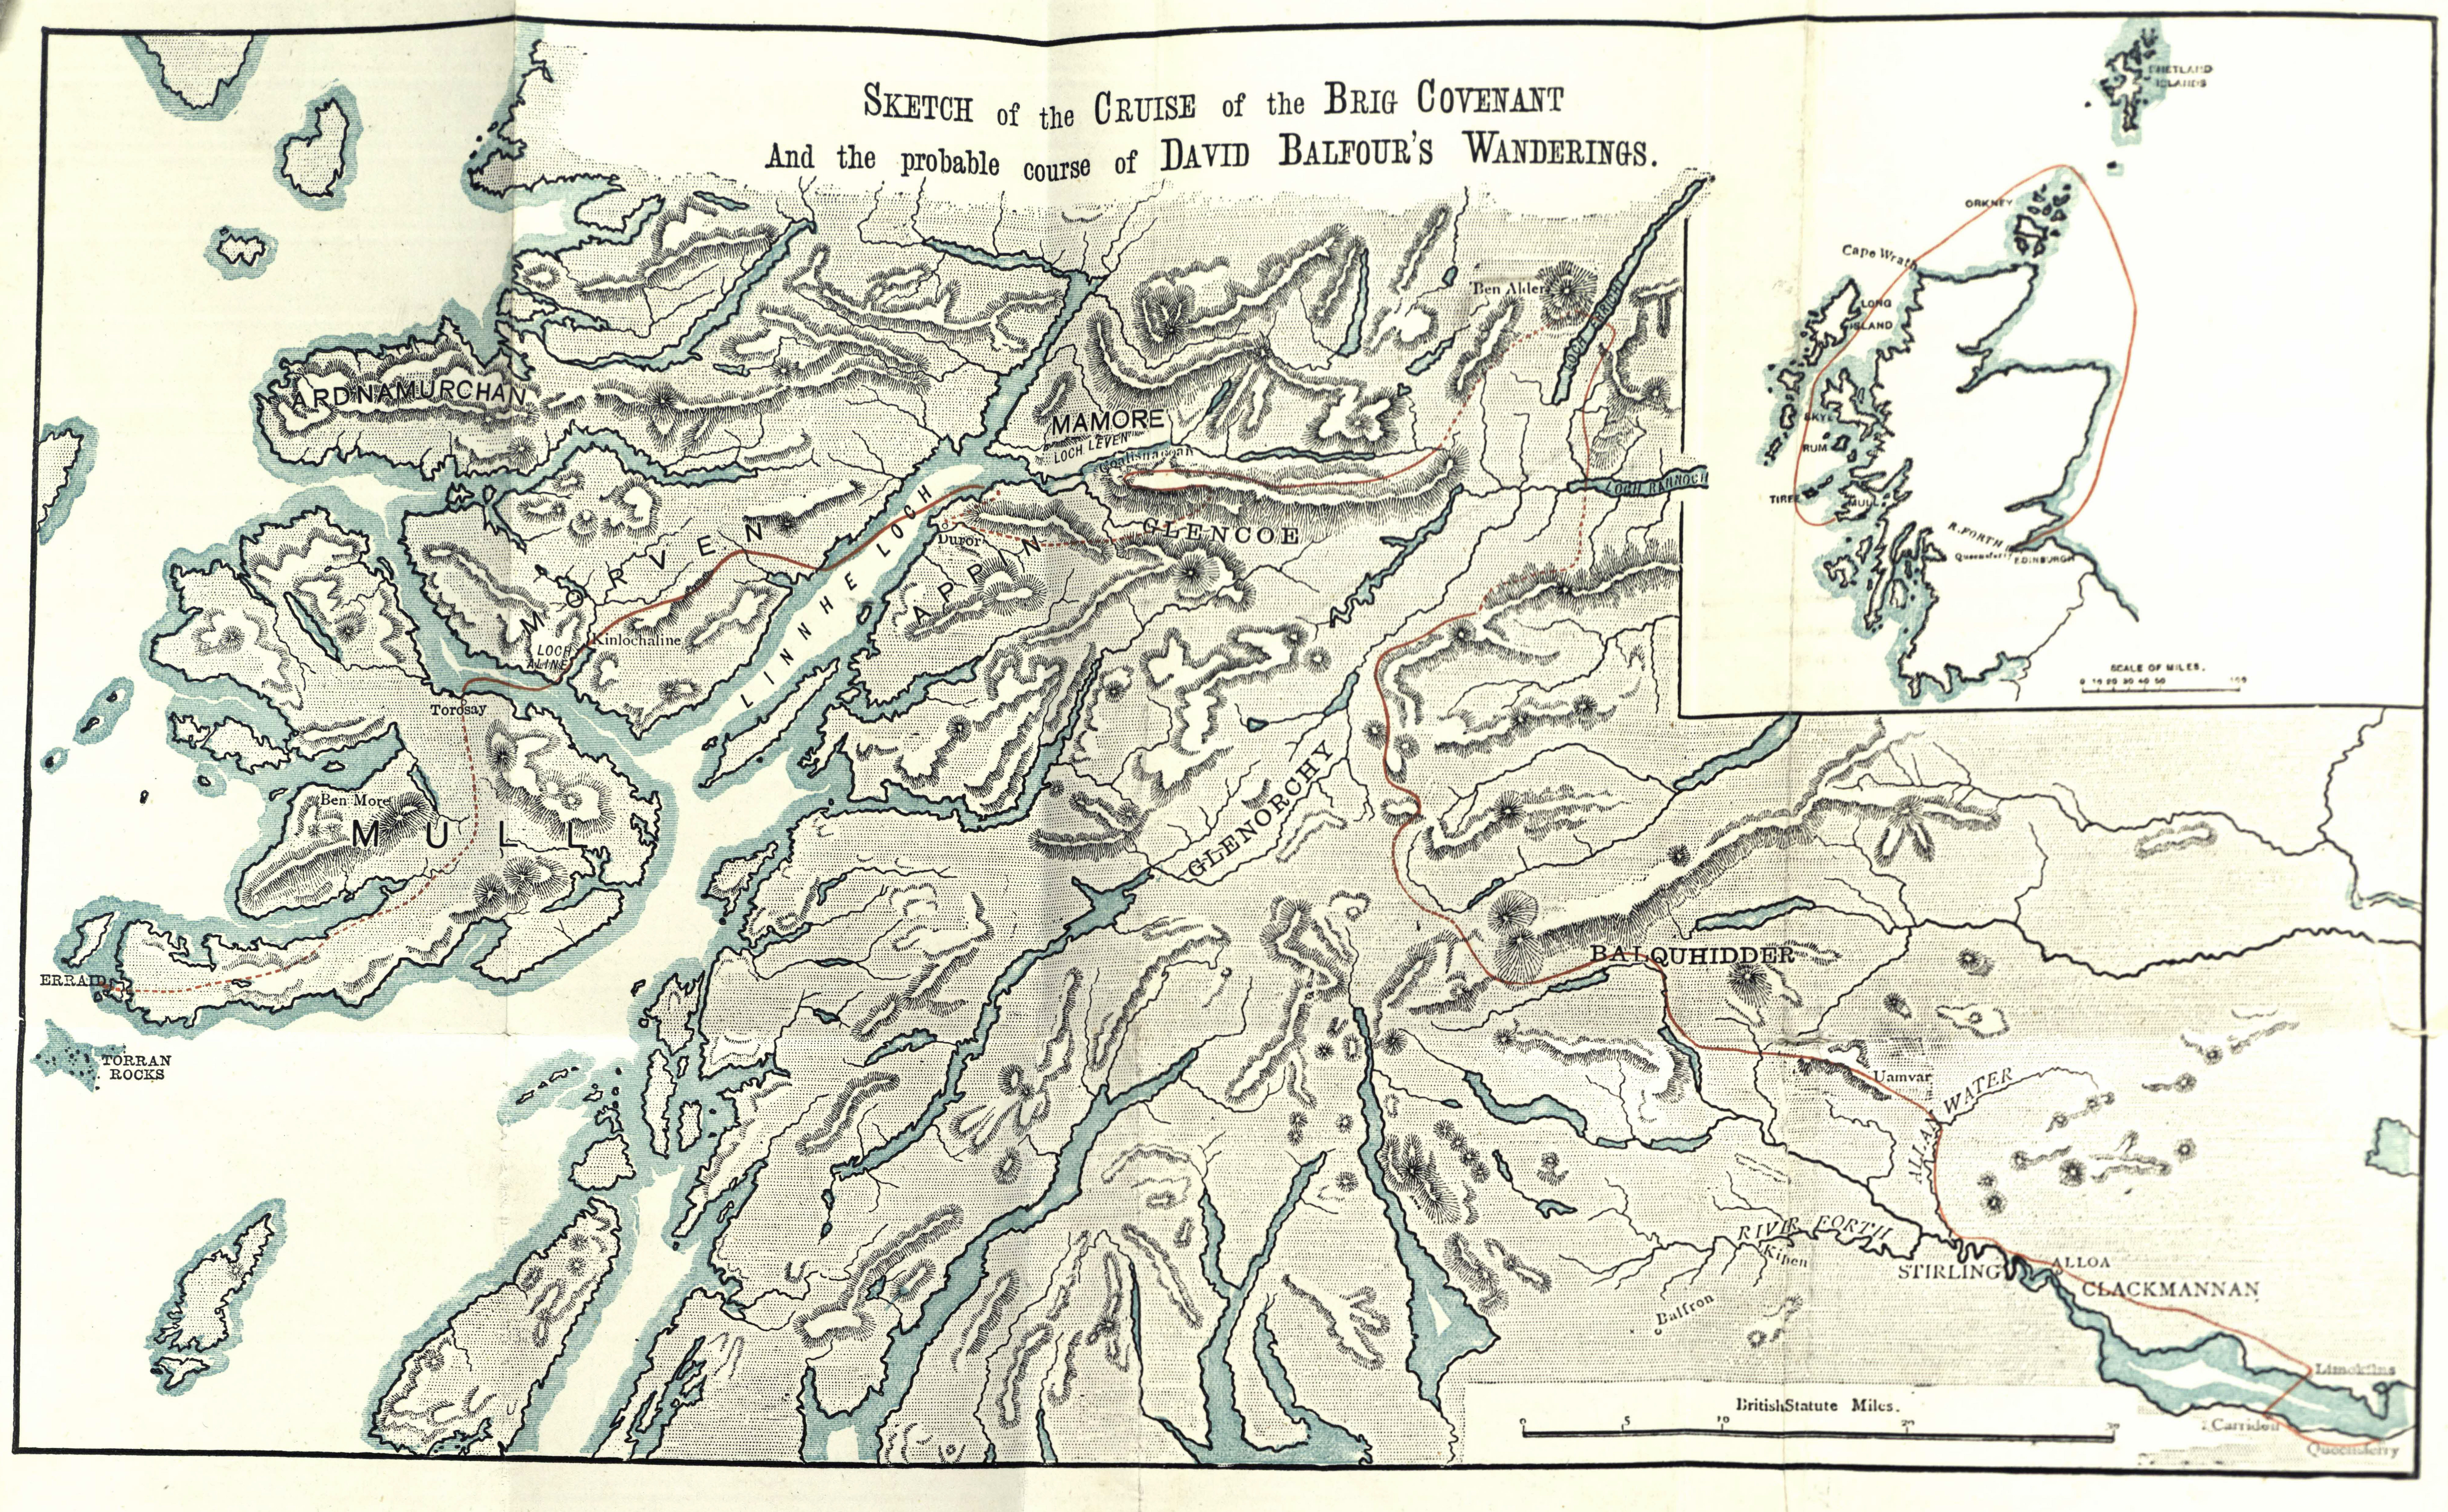 The fold-out map of the "cruise of the Brig Covenant and the probably course of David Balfour's wanderings" from the first edition of Kidnapped (1886)